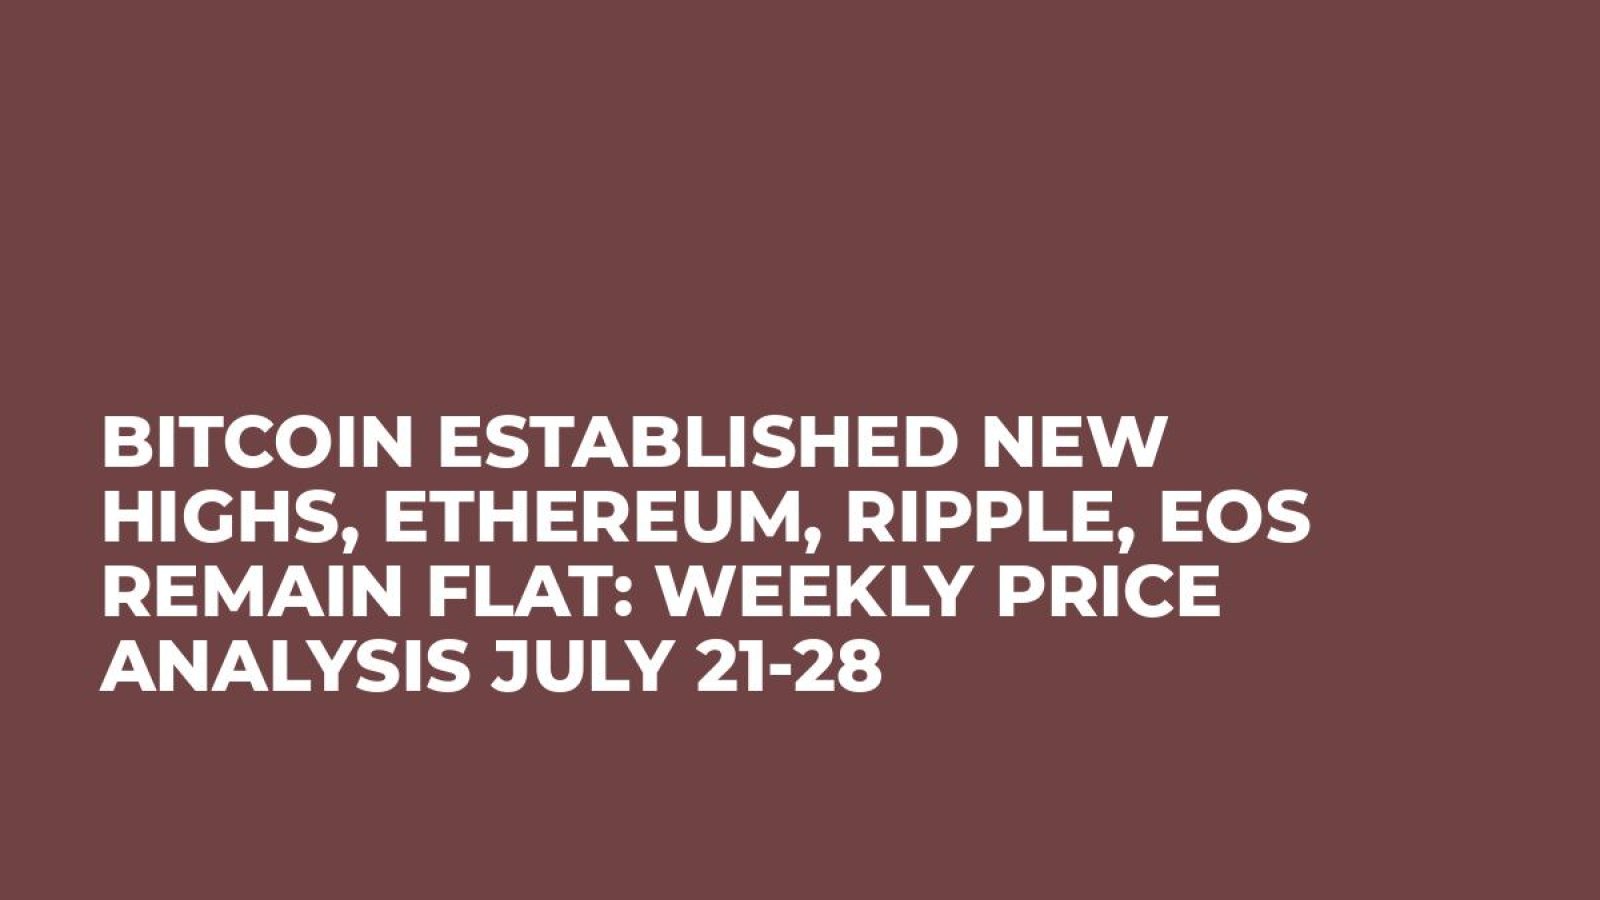 Bitcoin Established New Highs, Ethereum, Ripple, EOS Remain Flat: Weekly Price Analysis July 21-28